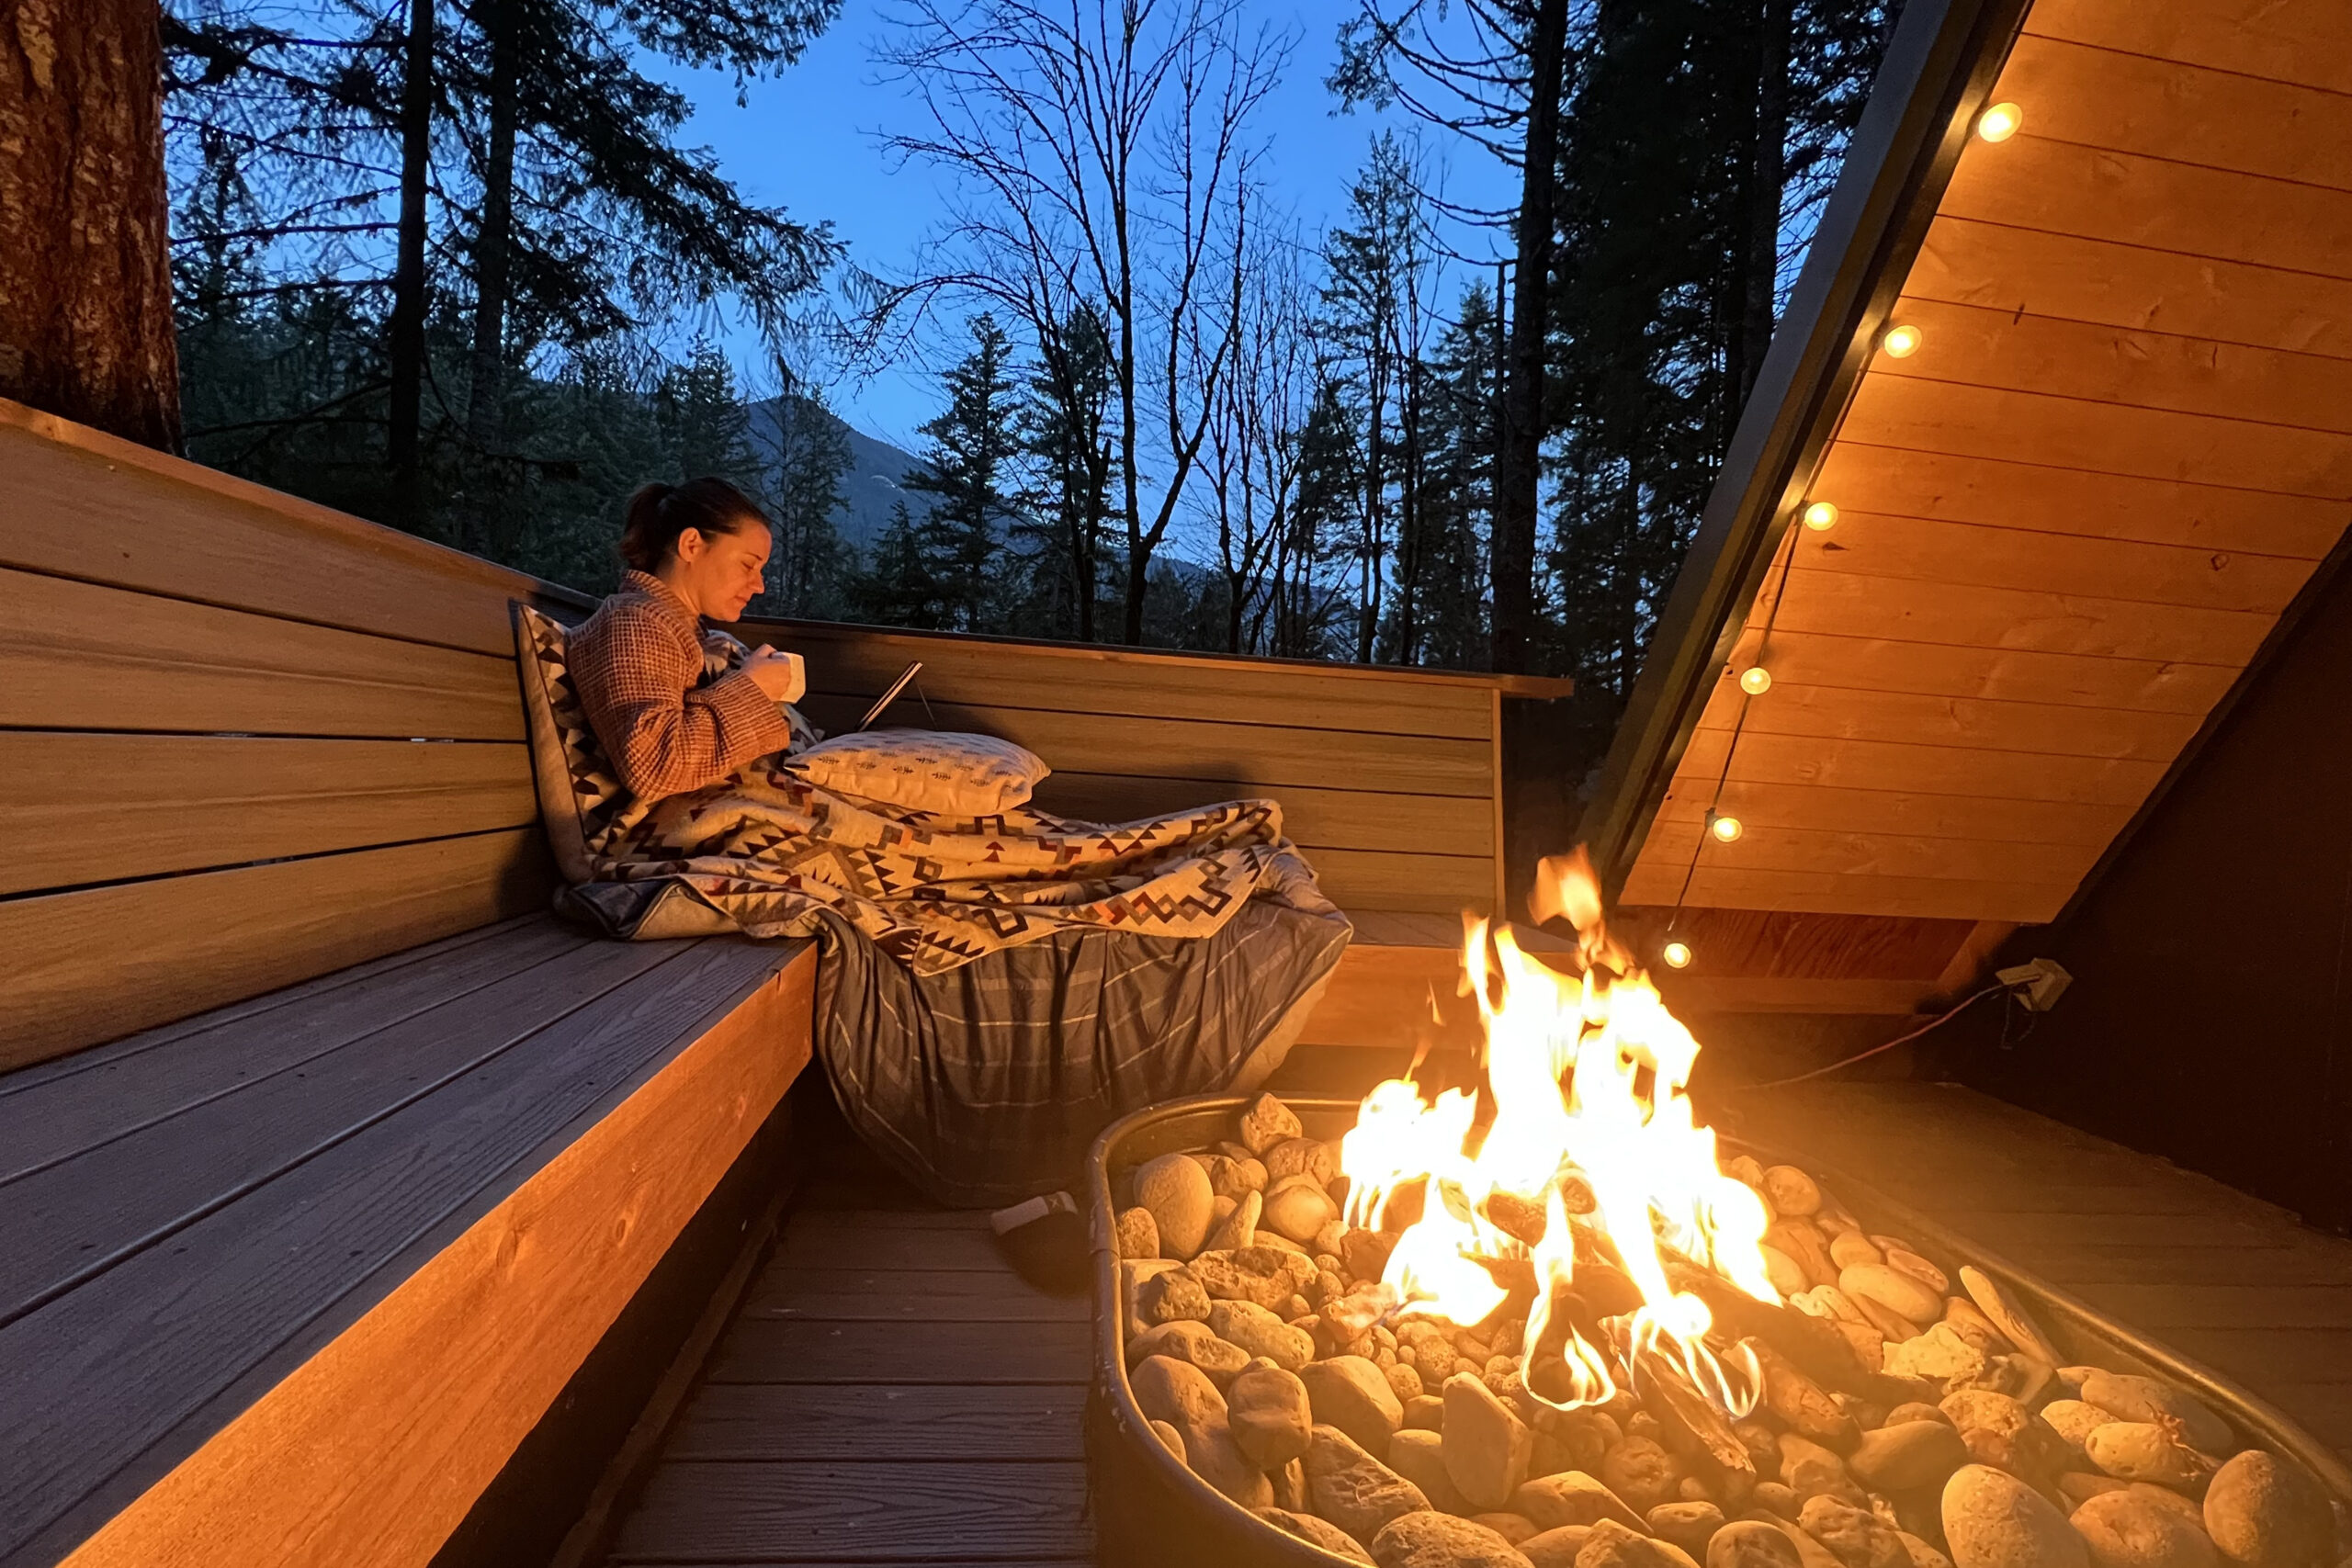 Photo of Maegan sitting on an outside bench, covered in blankets, reading a book next to the fire.